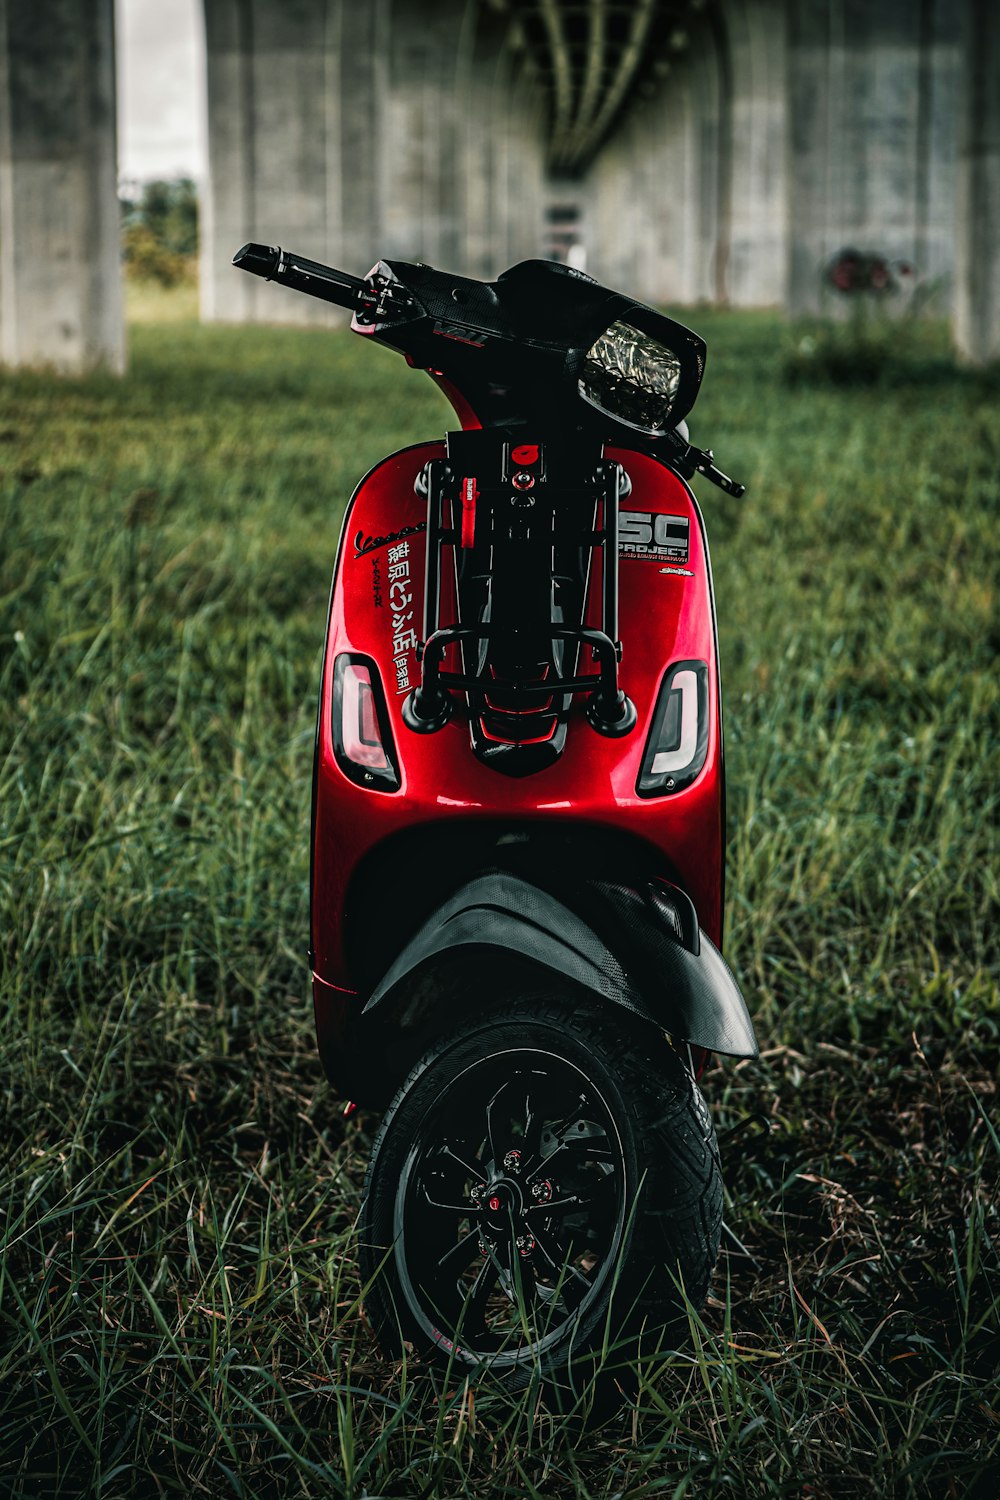 a red scooter parked in a grassy field